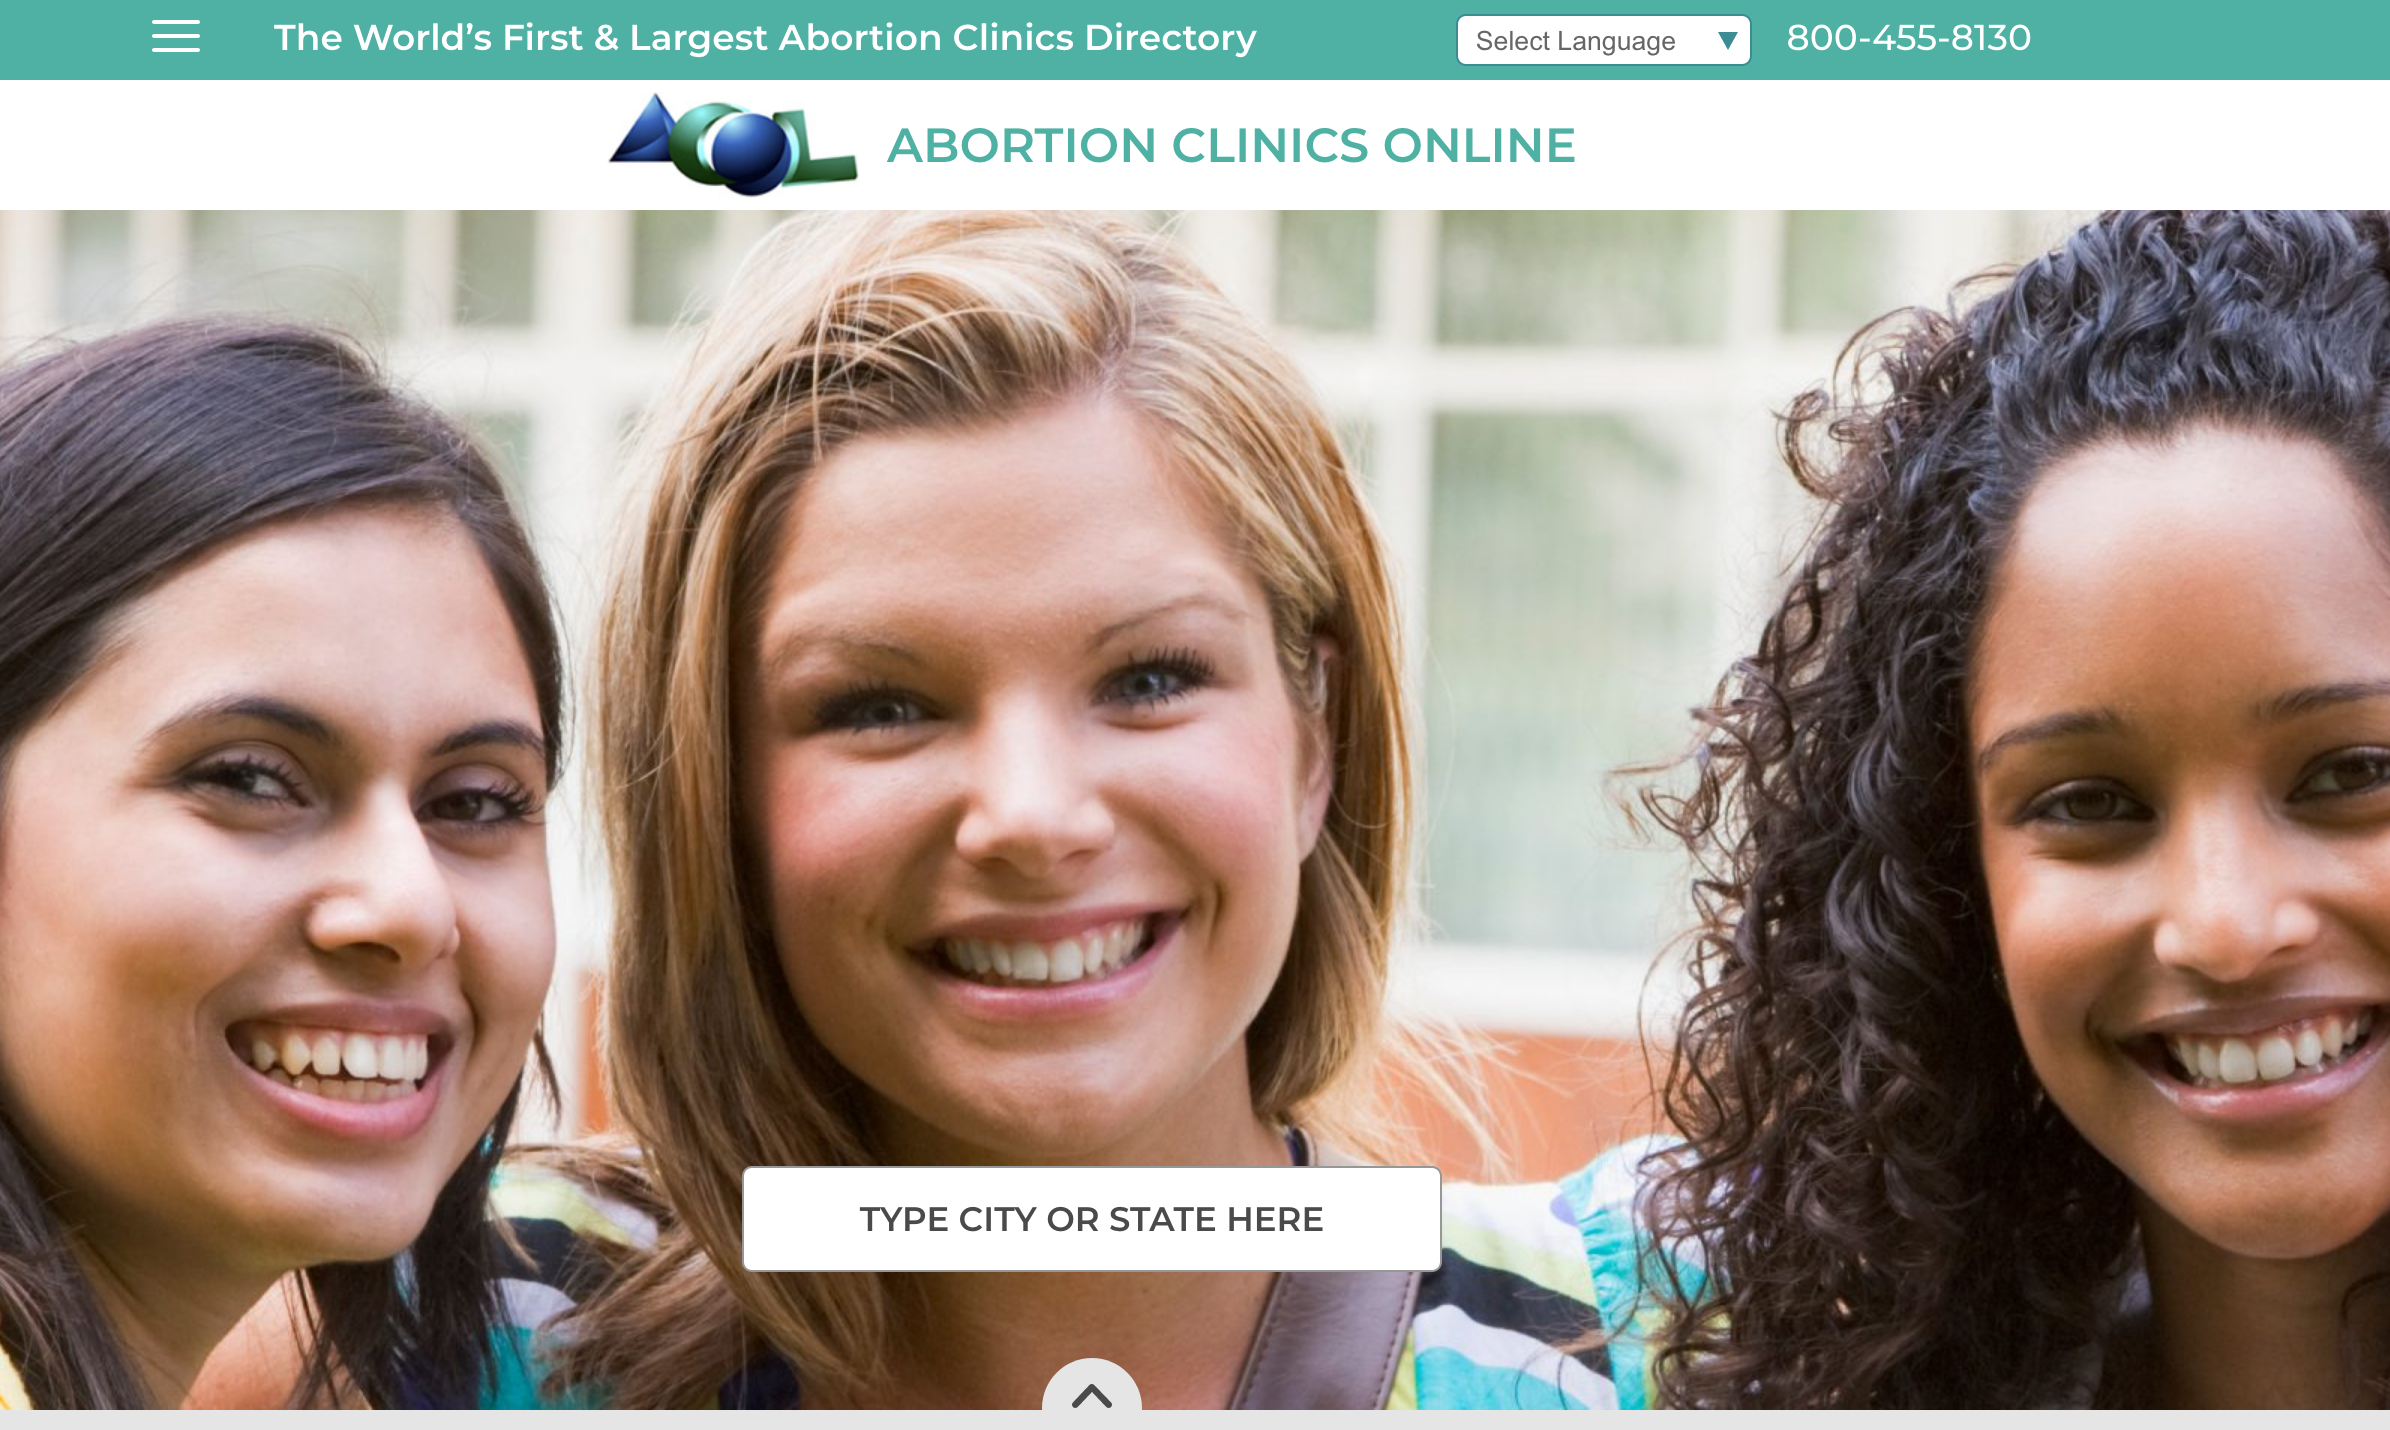 What people say about ACOL - Abortion Clinics Online directory of abortion clinics